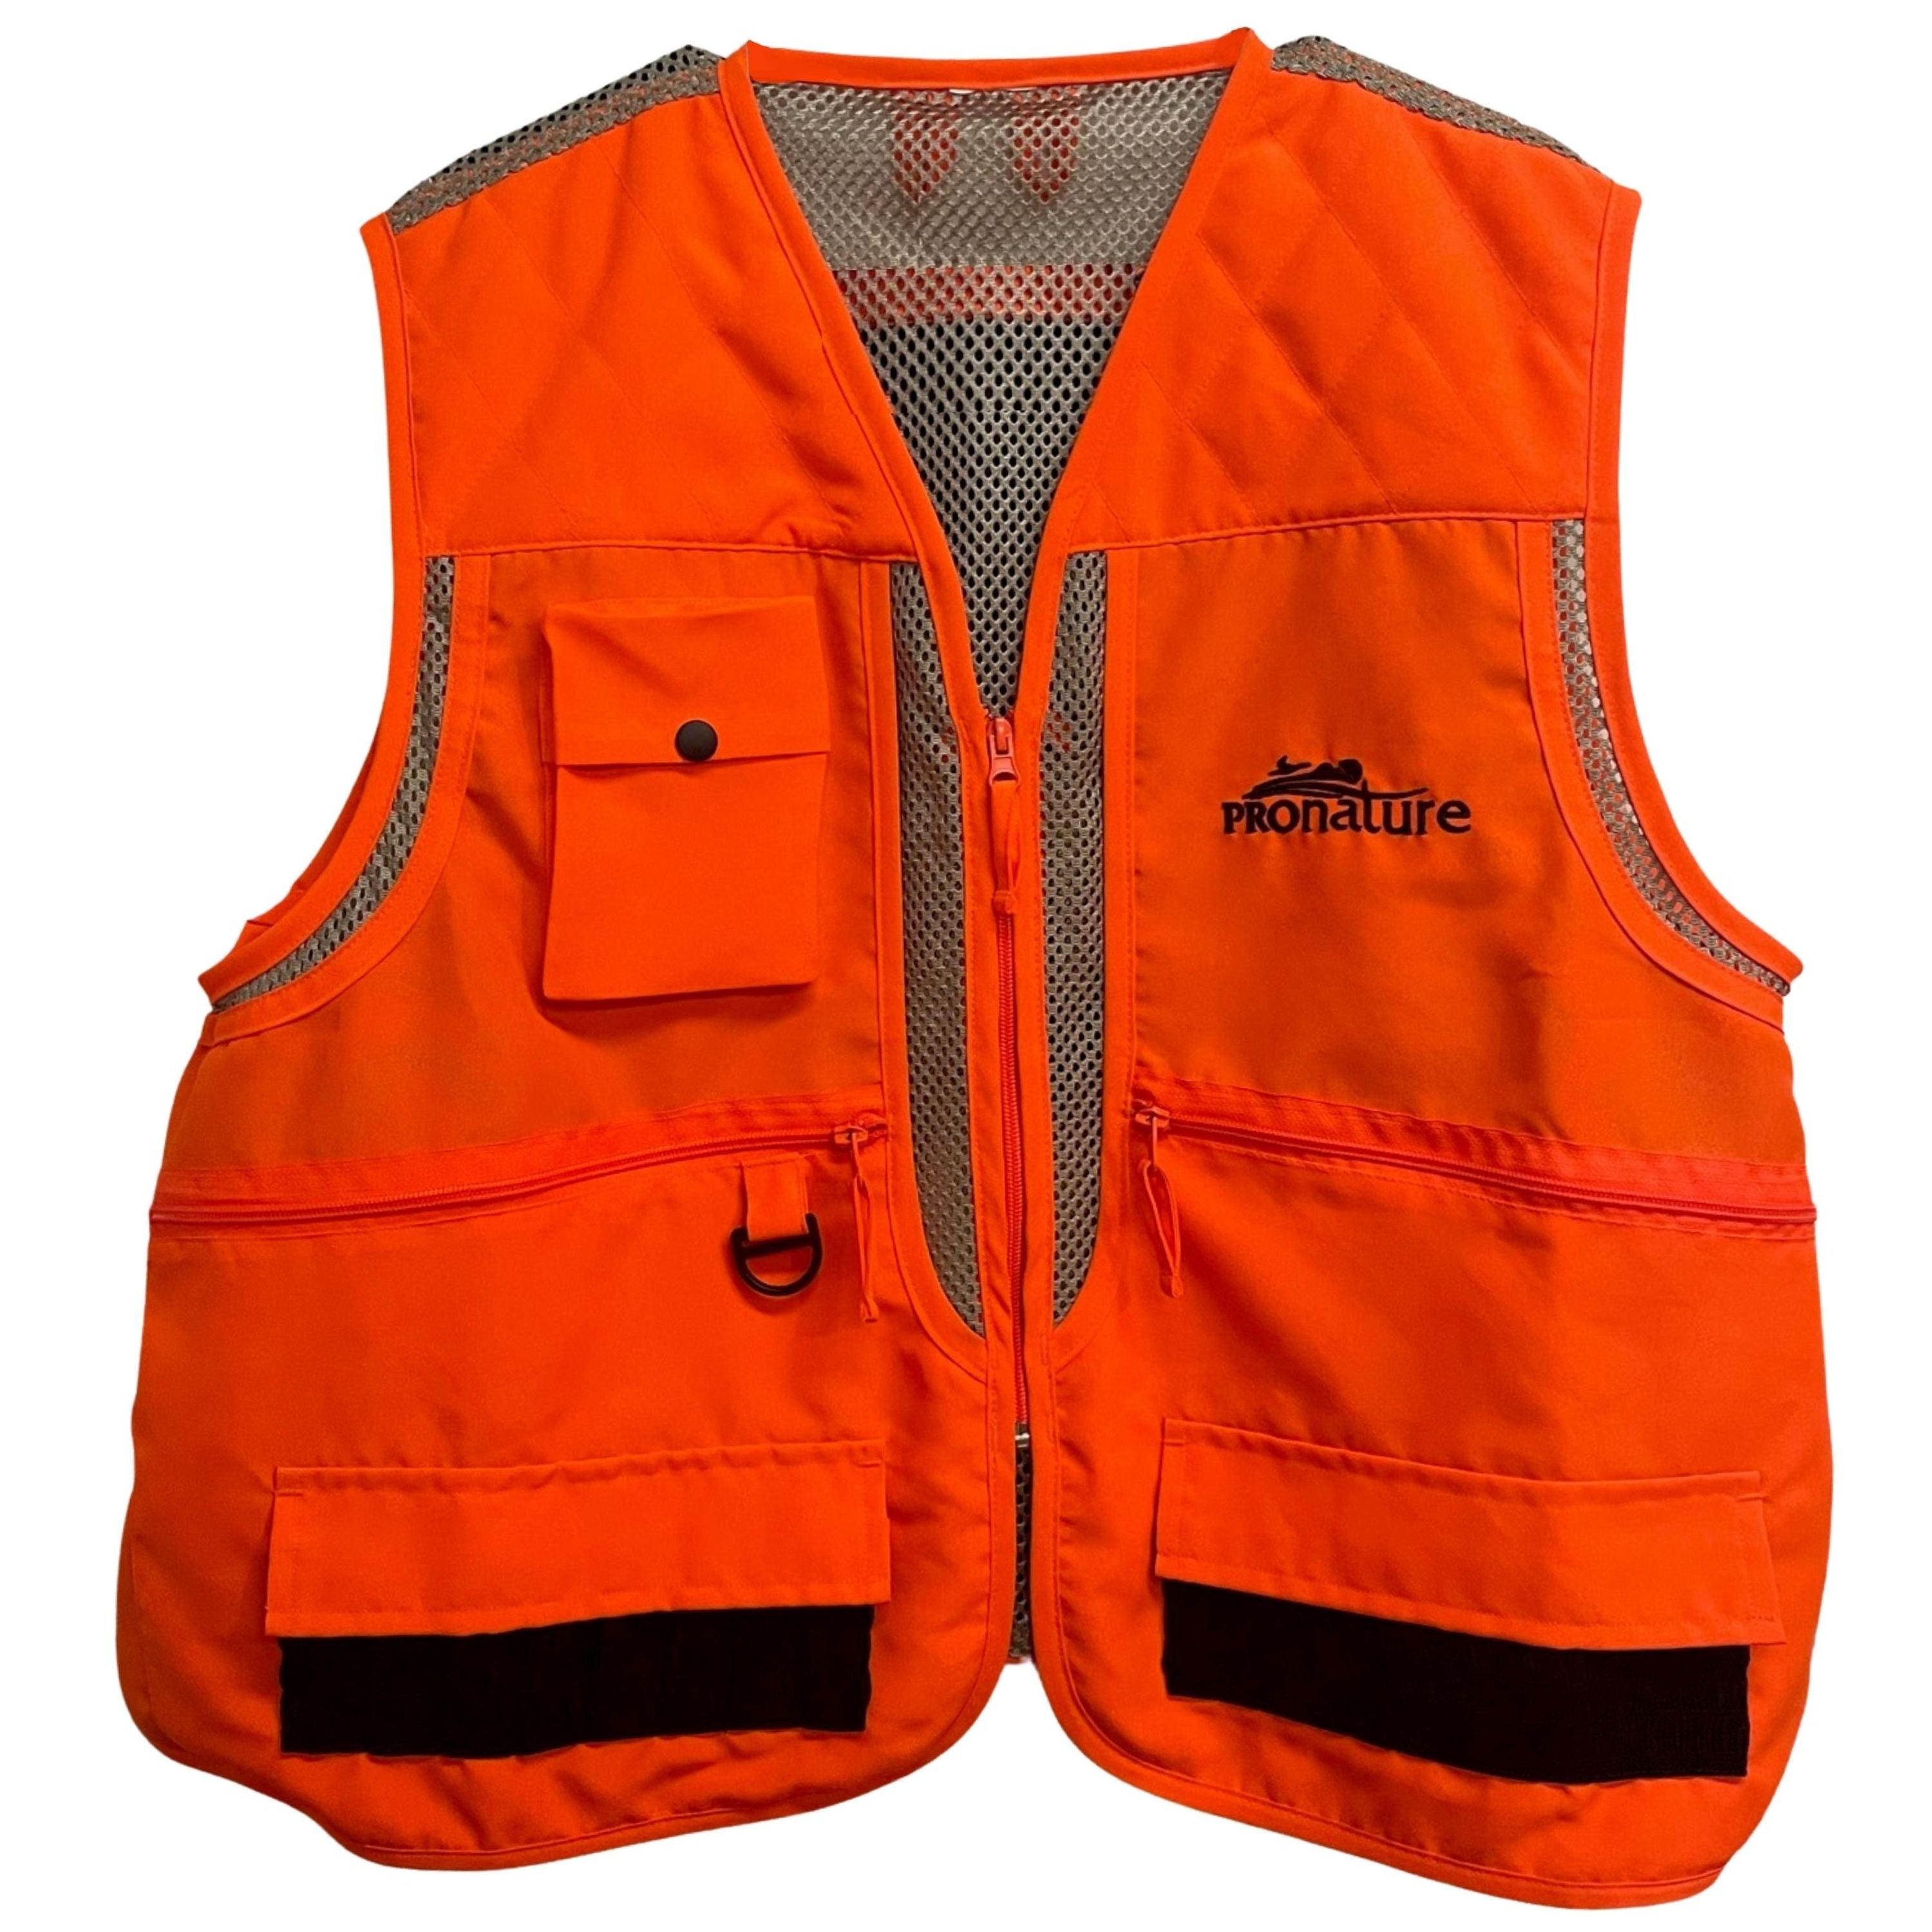 Small game hunting vest with multiple shell holders